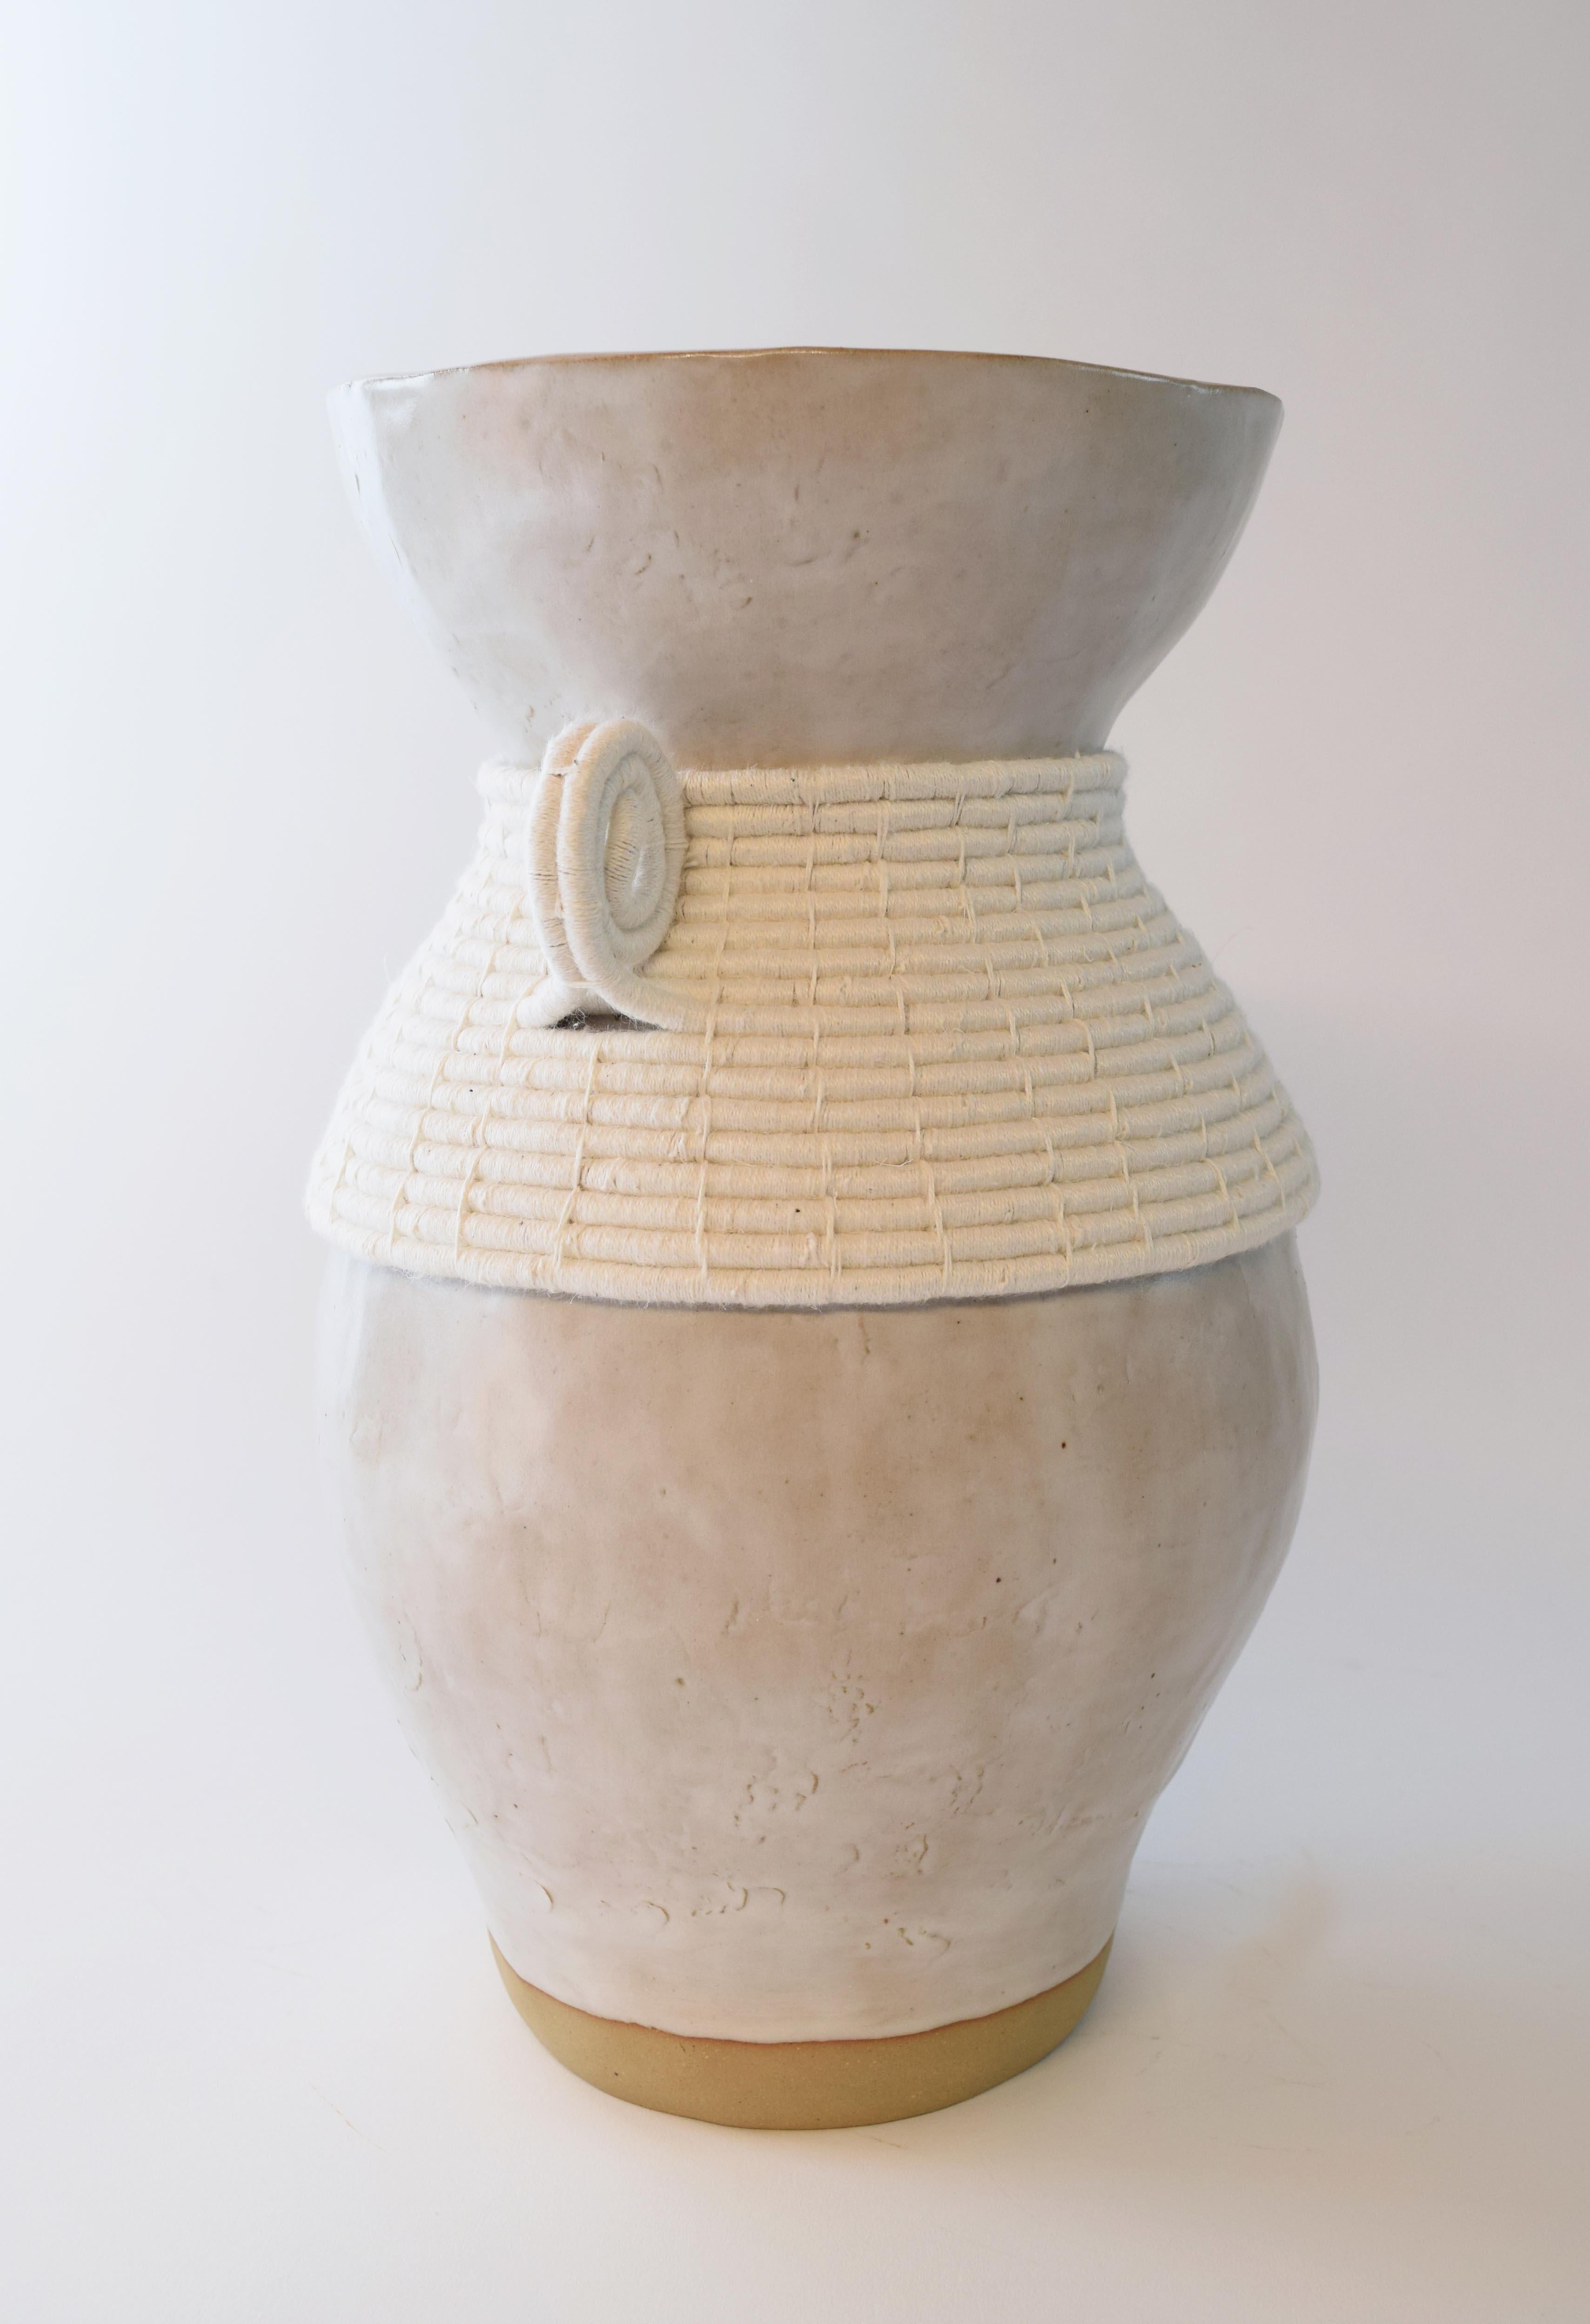 Vase #766 by Karen Gayle Tinney

Hand formed stoneware vase with white satin glaze. Woven white cotton detailing around outside of vessel. Vase is water tight.

13.5”H x 8”W

One of a kind collections are released periodically throughout the year.